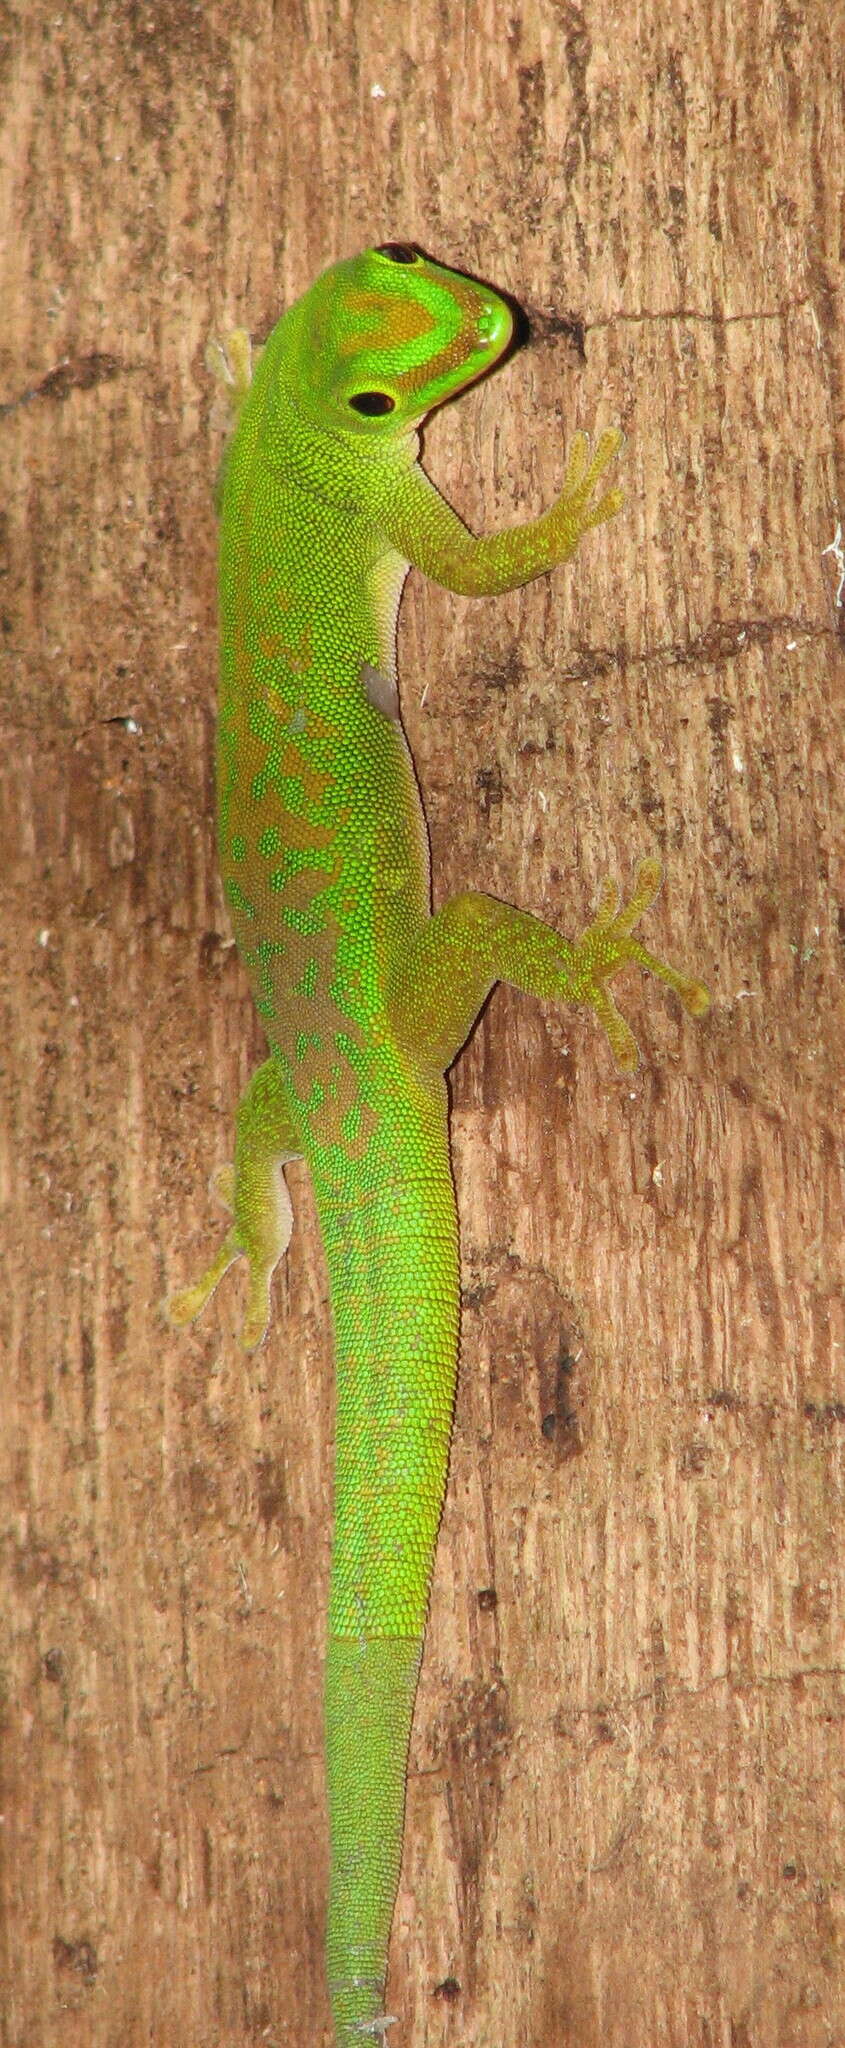 Image of Seychelles Day Gecko